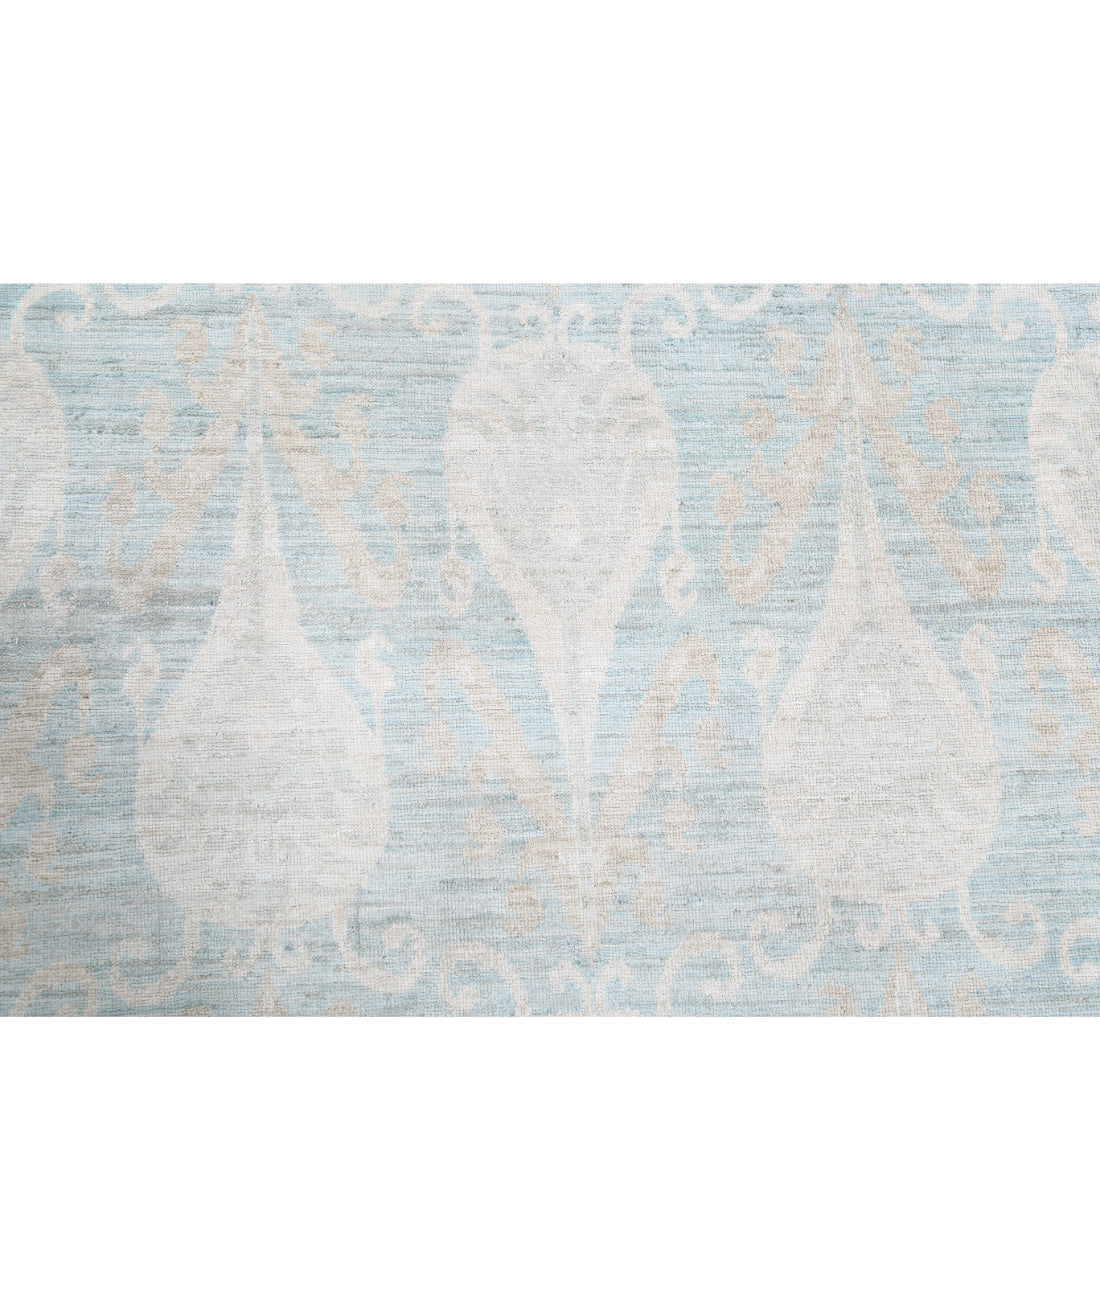 Hand Knotted Ikat Wool Rug - 11'4'' x 14'2'' 11'4'' x 14'2'' (340 X 425) / Blue / Blue